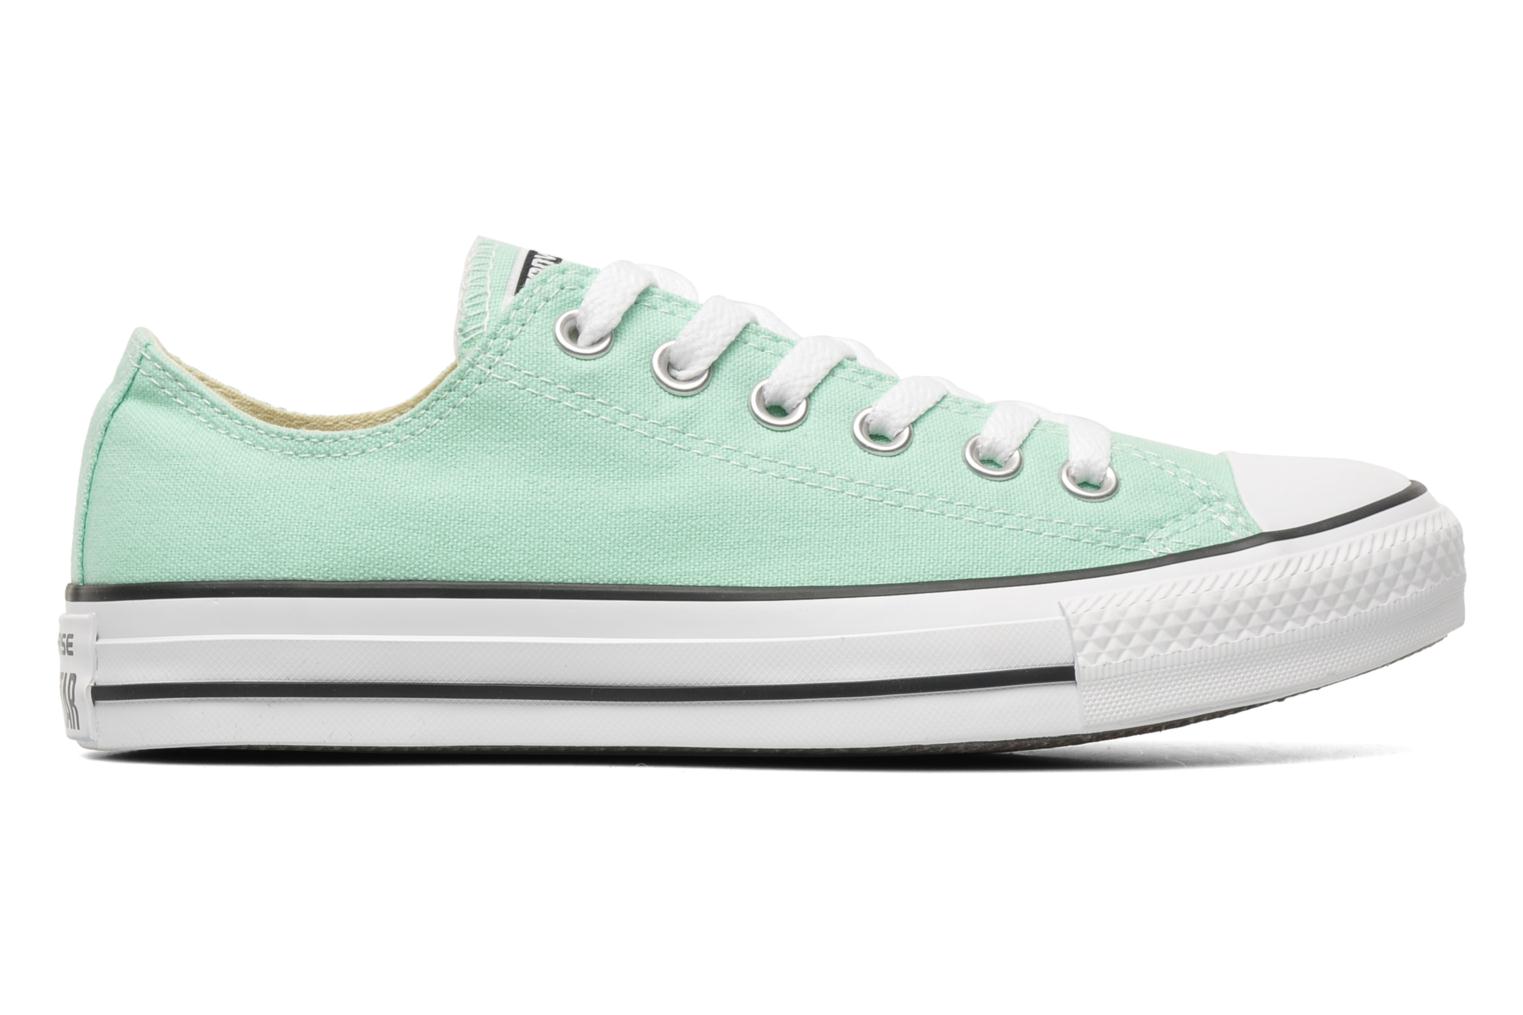 Converse Chuck Taylor All Star Ox W Trainers in Green at Sarenza.co.uk